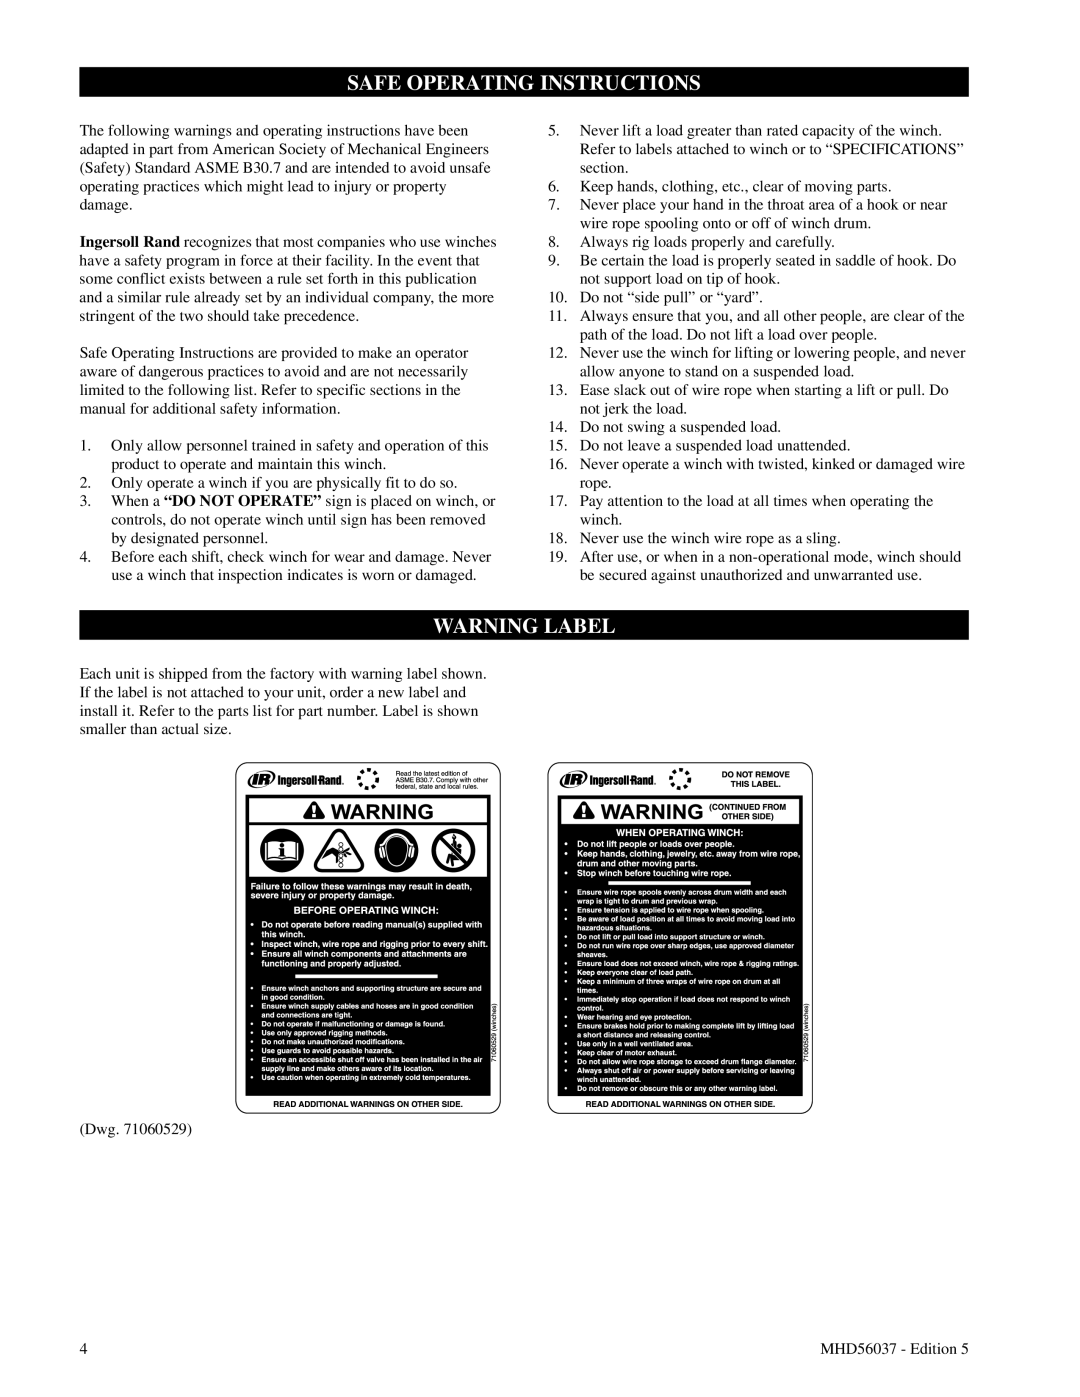 Ingersoll-Rand FA5T manual Safe Operating Instructions, Warning Label 